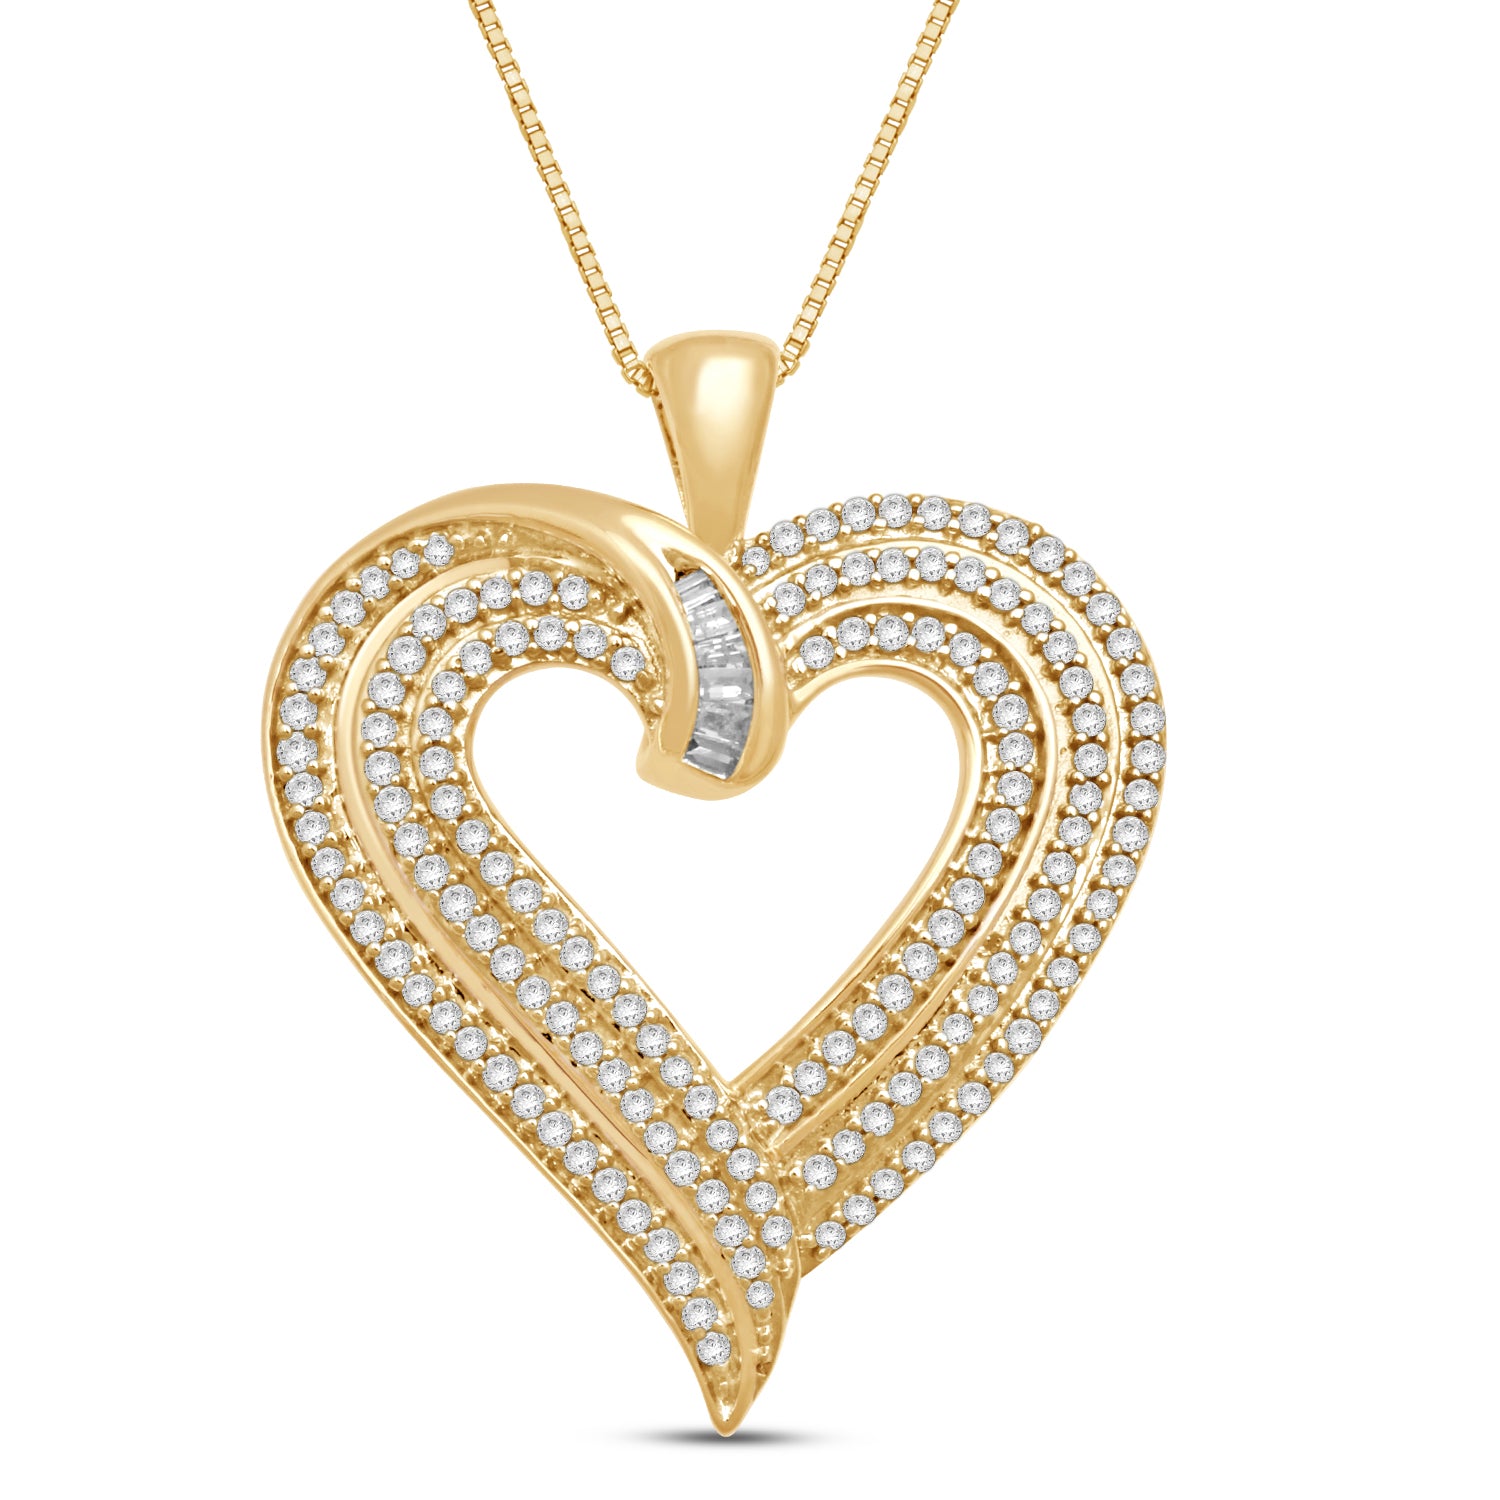 10k Gold Reversible Eve Necklace – By Invite Only